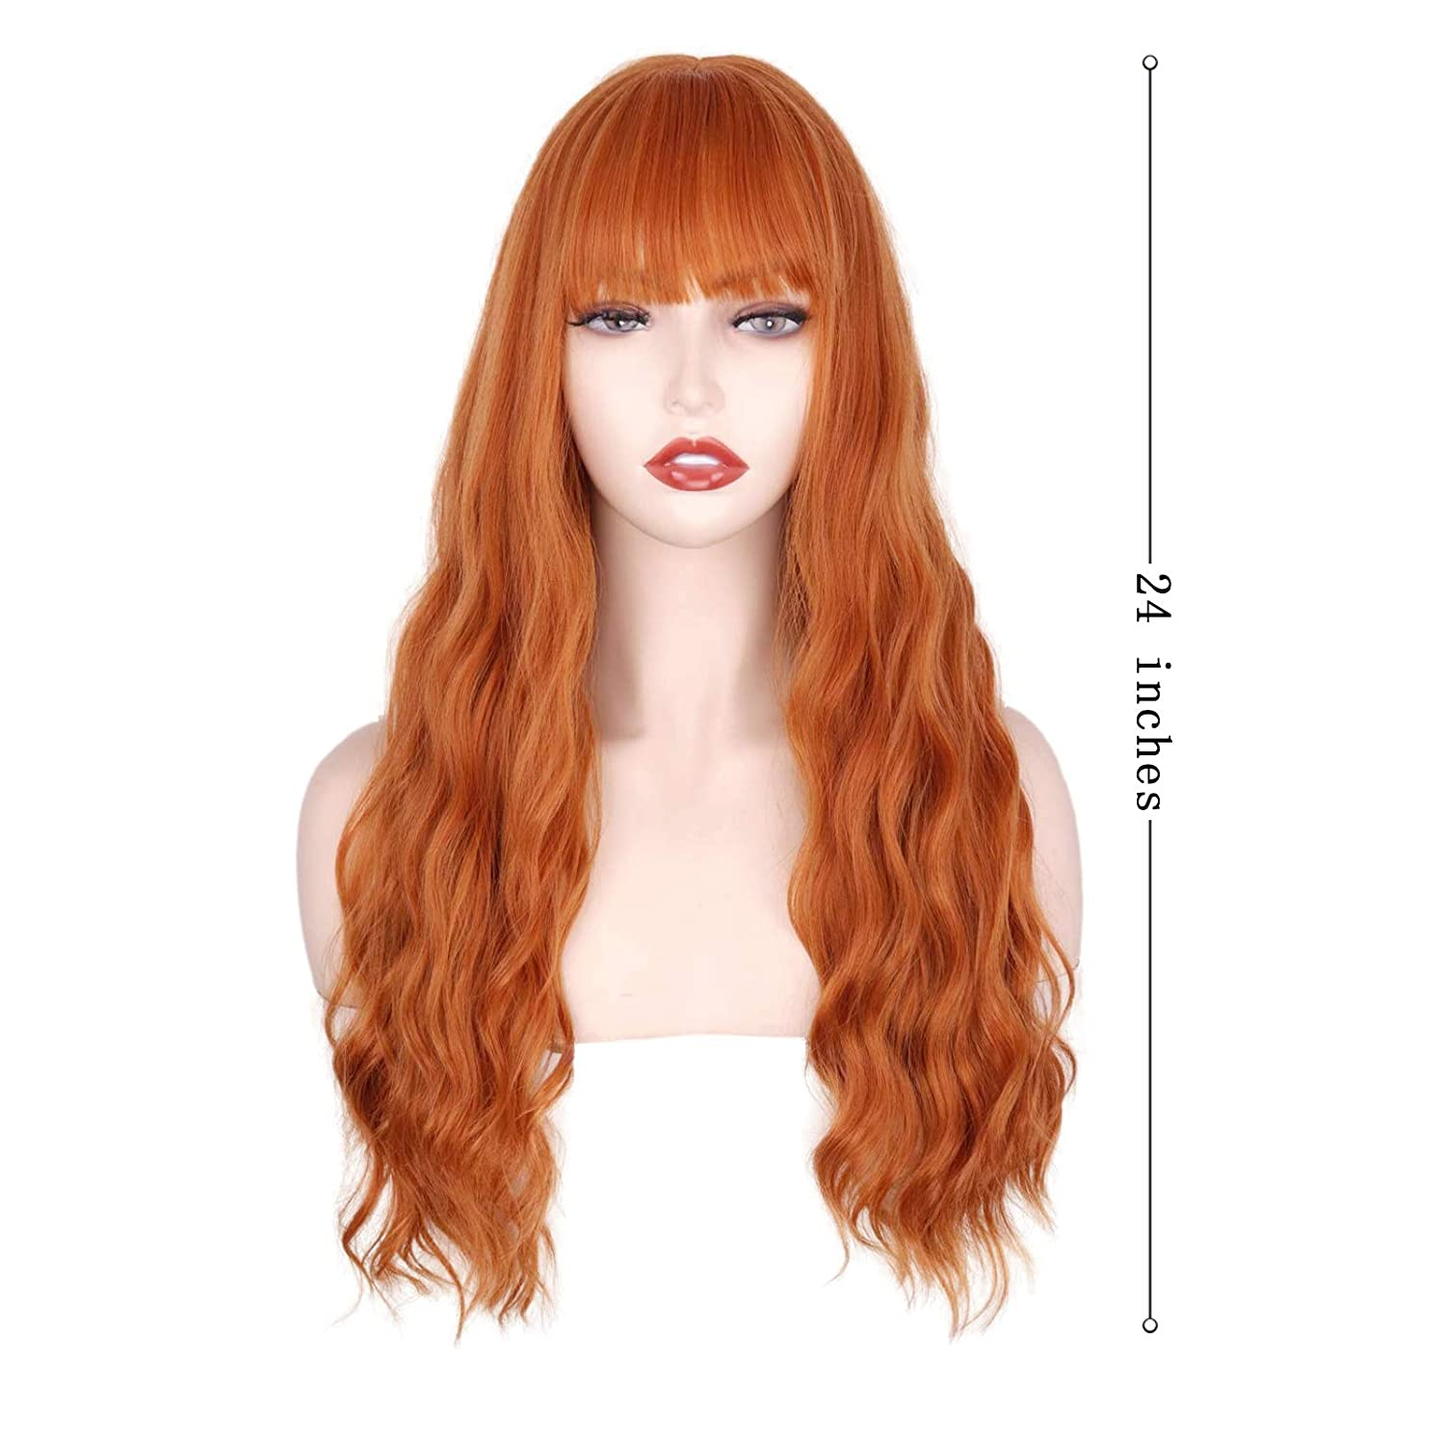  24 Inches Long Wavy Orange Wig with Bangs For Women